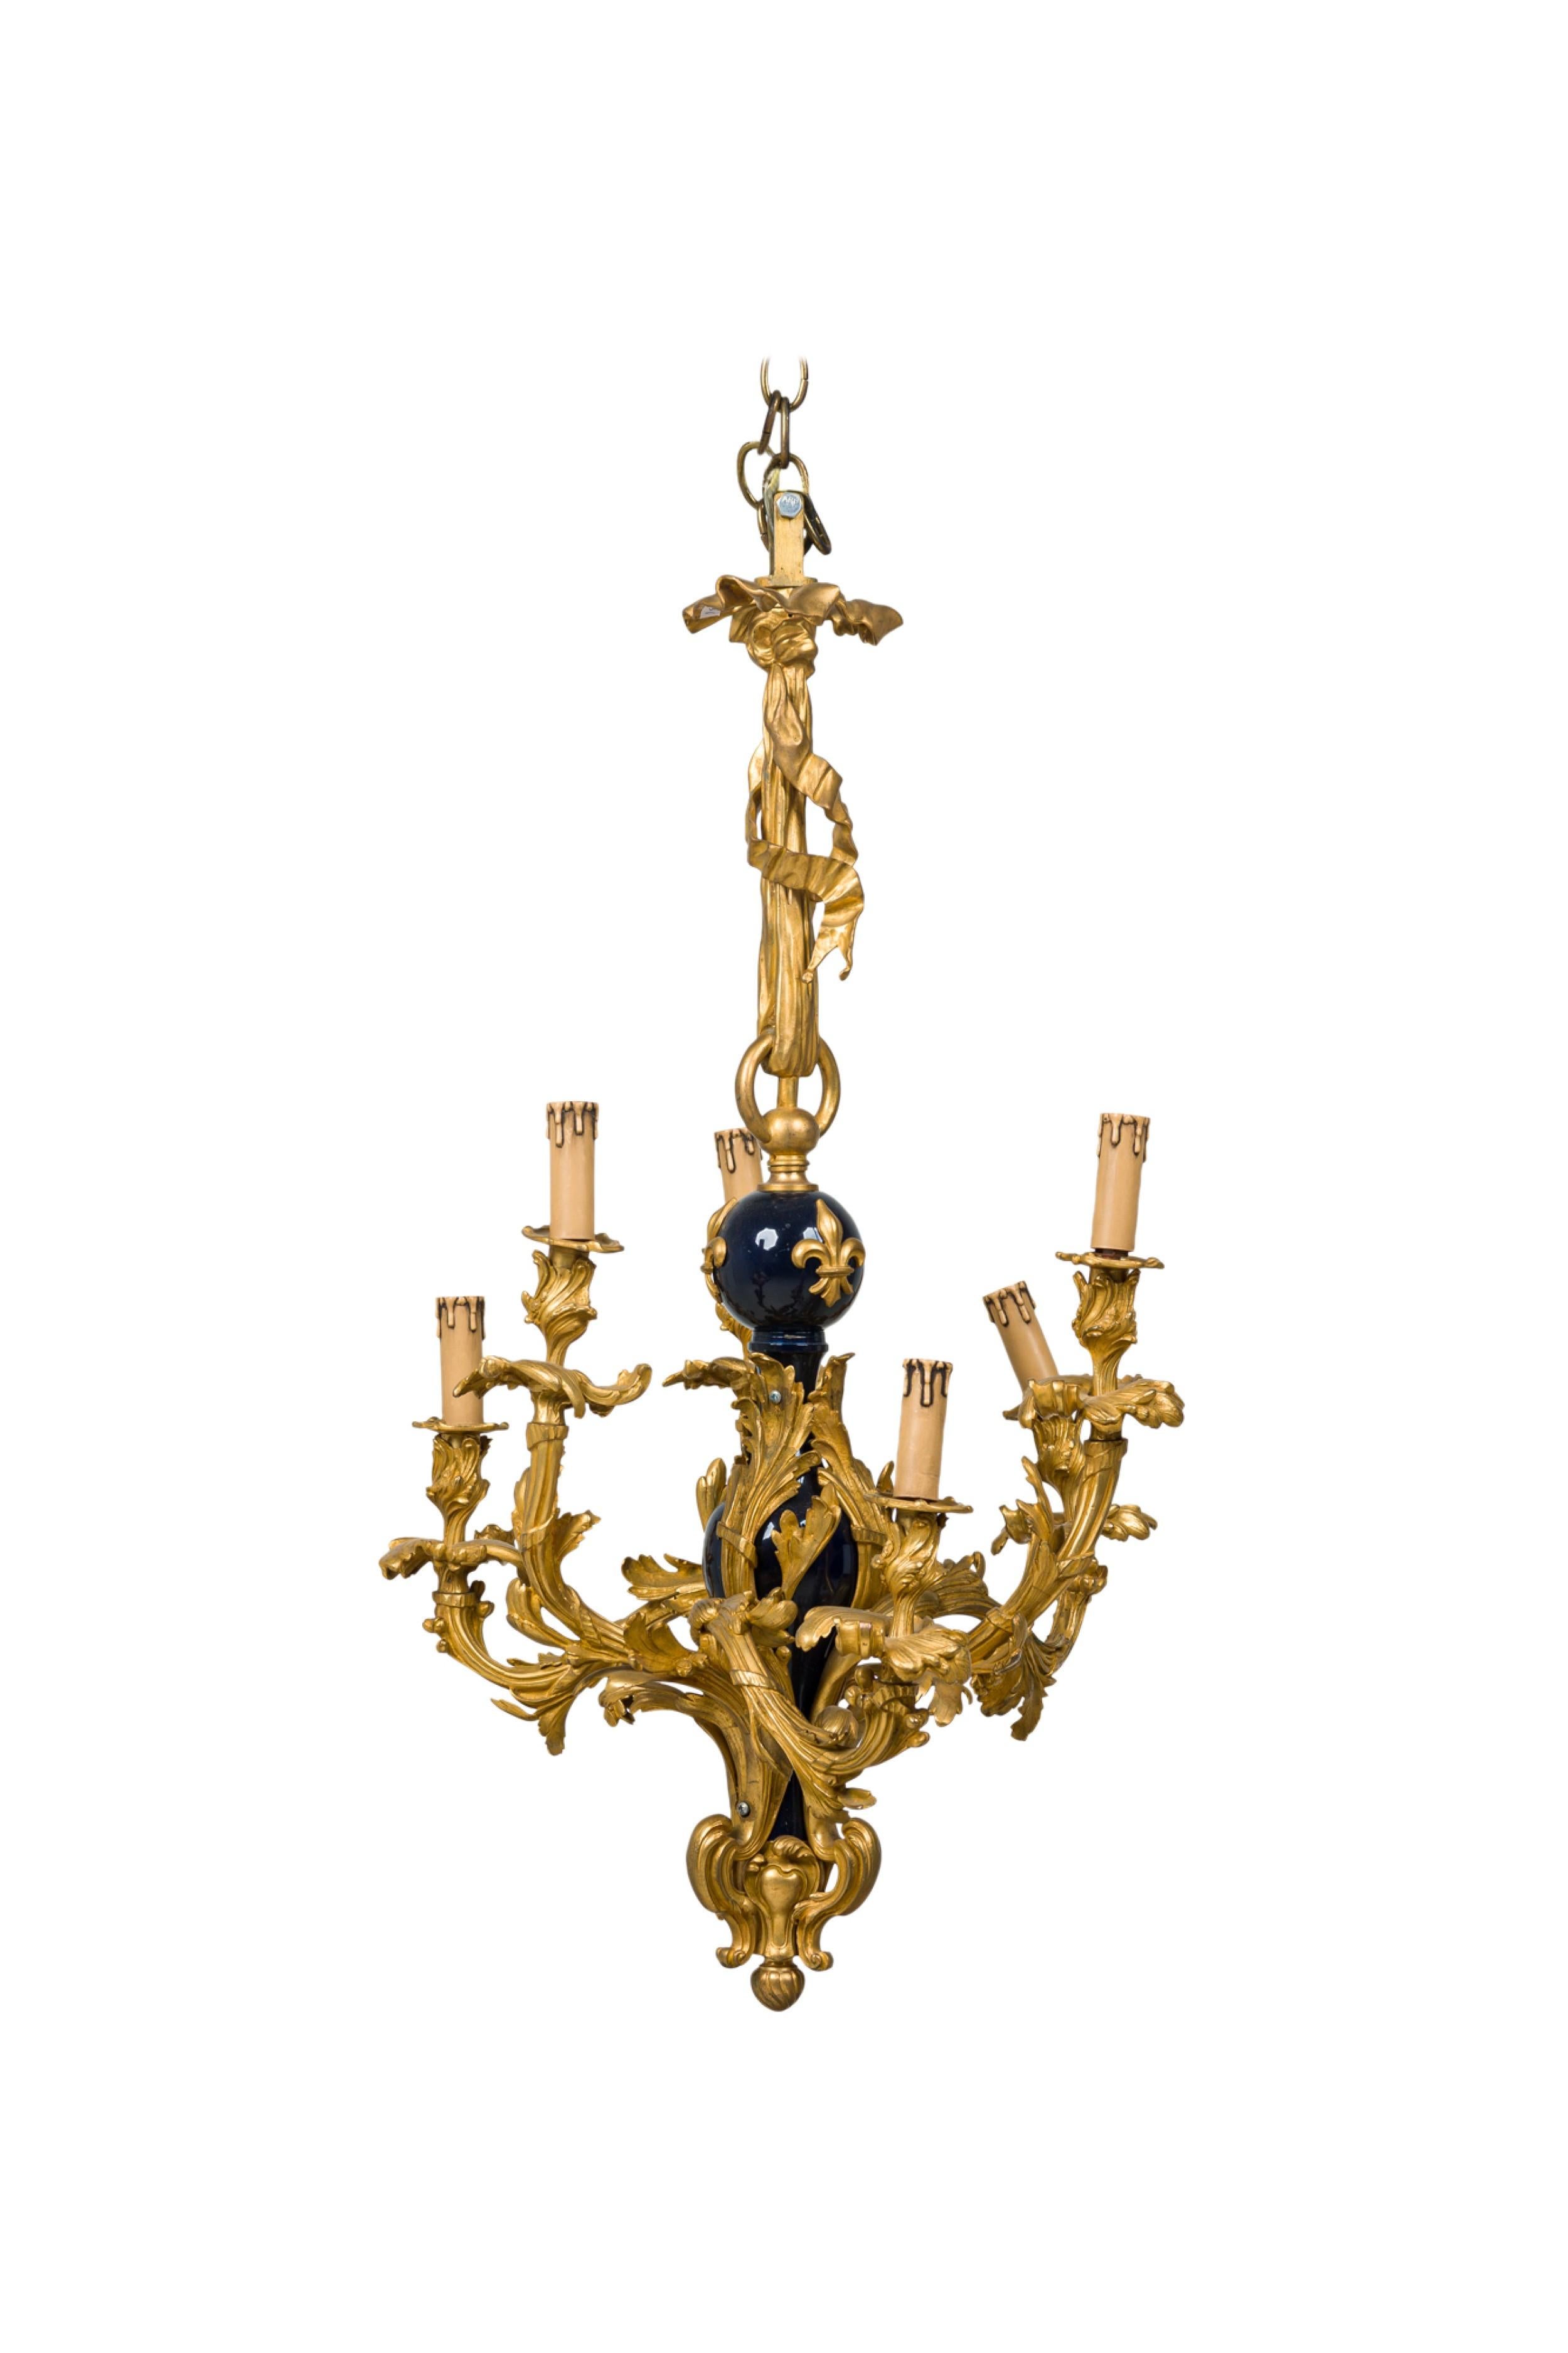 French Louis XV-Style (19th Century) bronze dore 8-arm chandelier featuring a Baroque scroll form frame and sculptural cobalt porcelain body with 3 applied bronze fleur de lis decorations at center.
